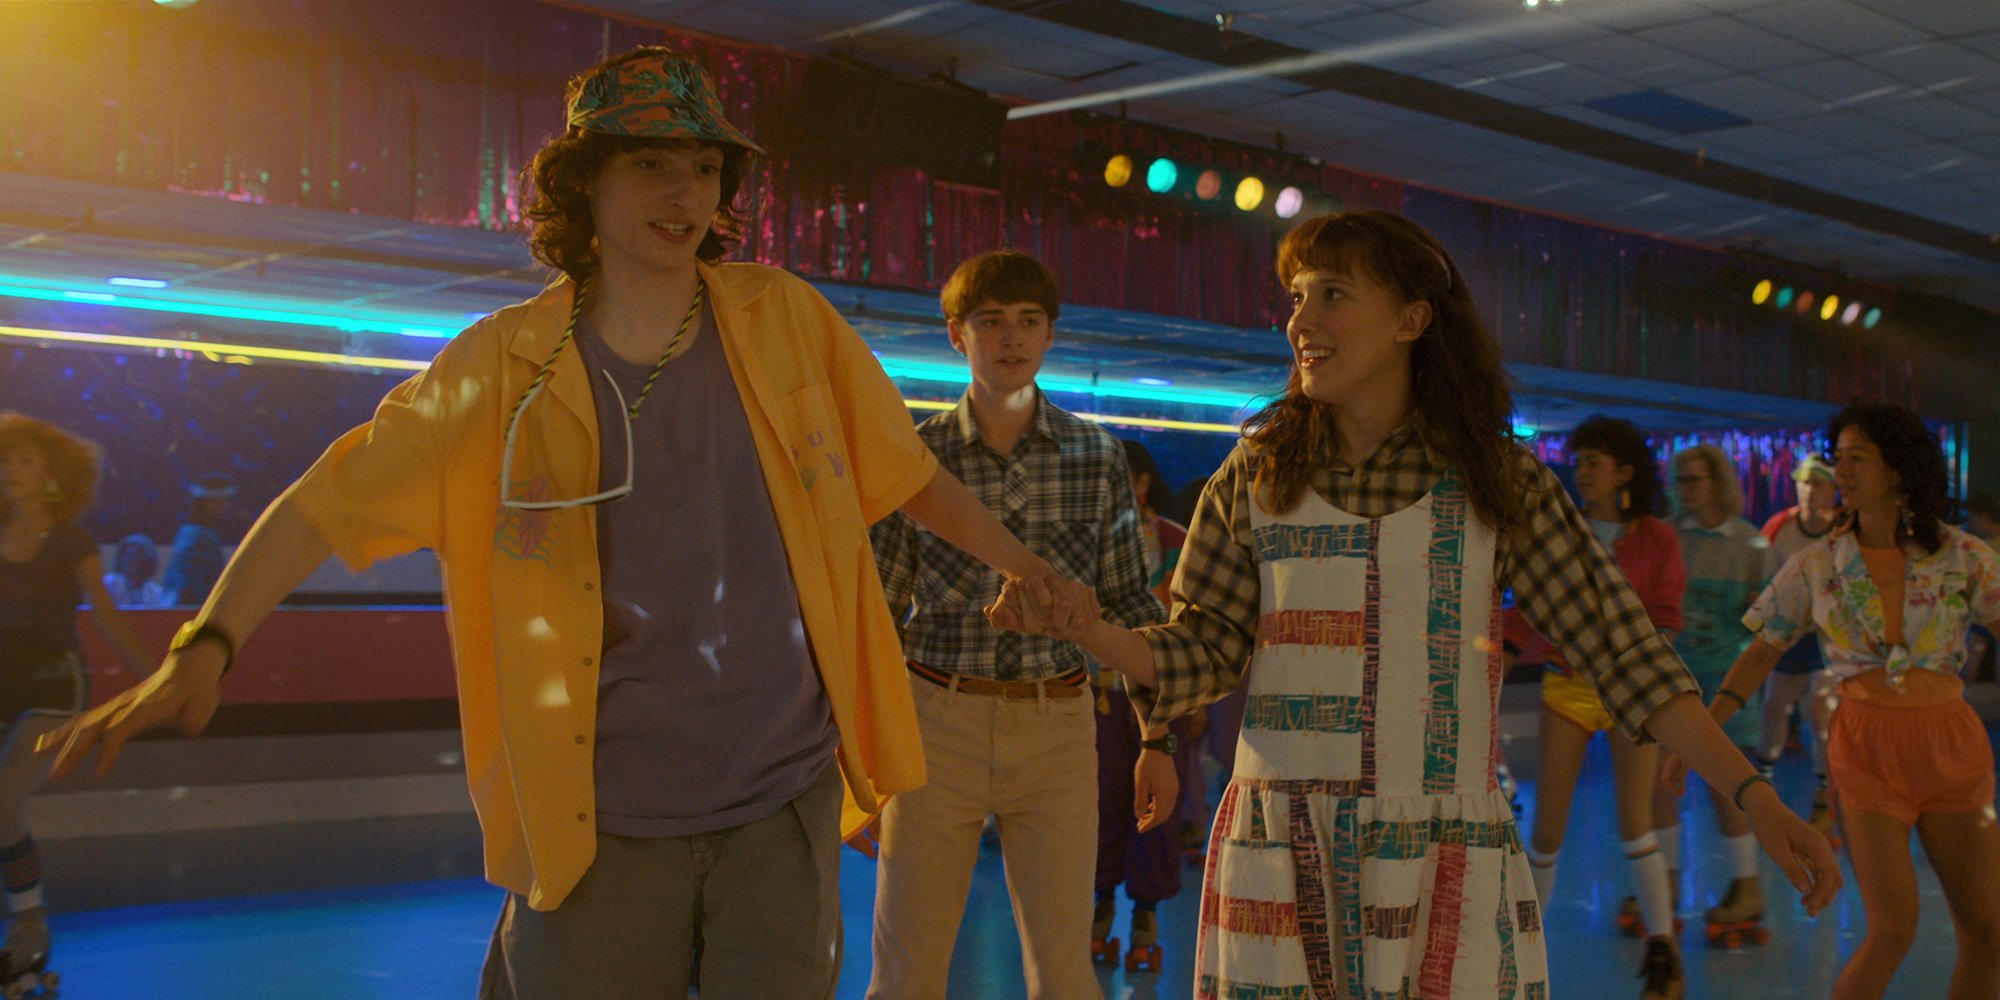 'Stranger Things' stars Millie Bobby Brown, Finn Wolfhard, and Noah Schnapp at a roller rink in a scene from season 4.